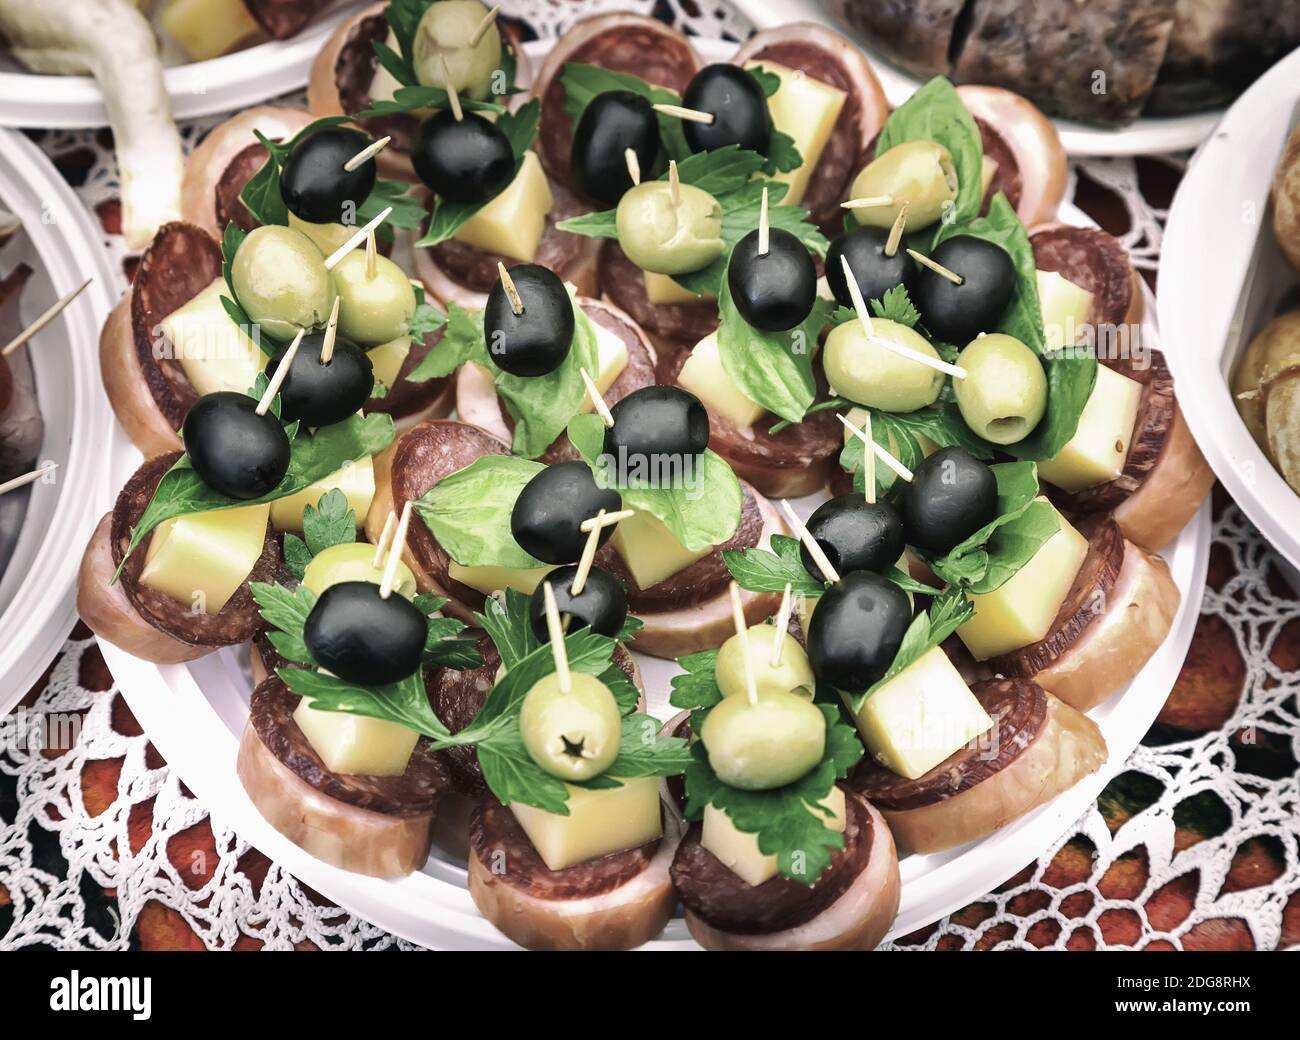 Sandwiches with cheese, sausage and olives. Stock Photo